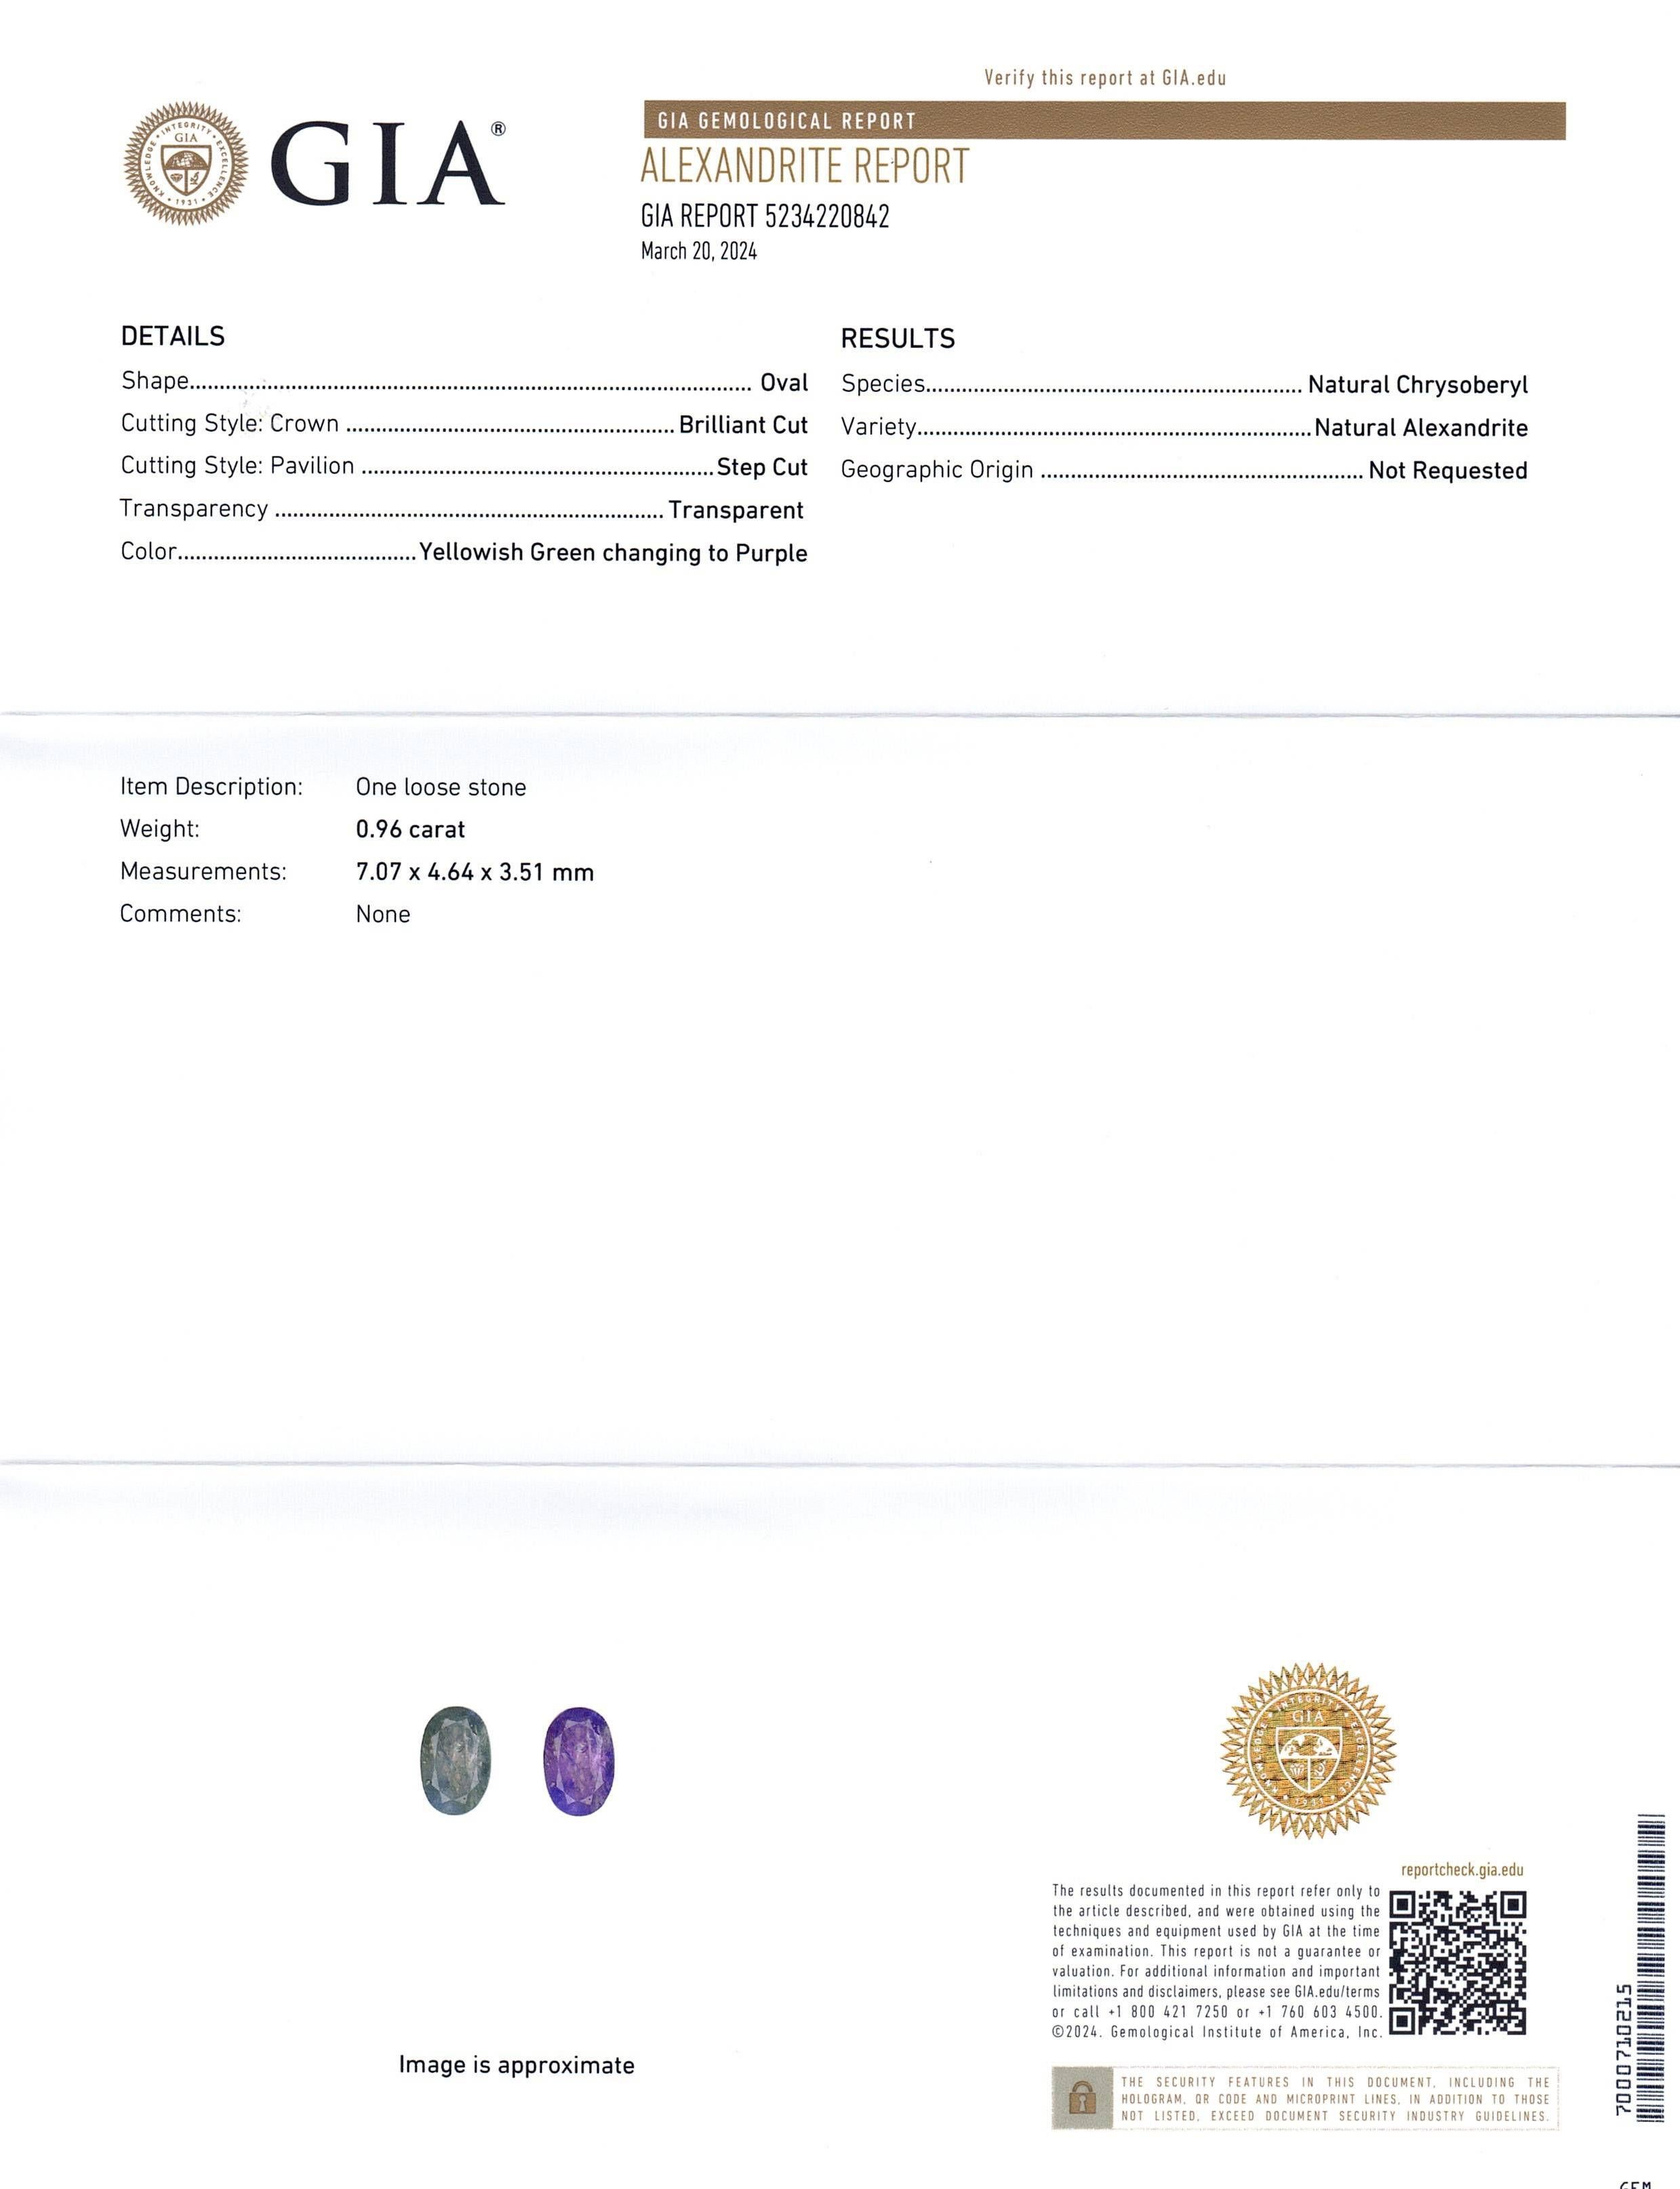 This is a stunning GIA Certified Alexandrite 


The GIA report reads as follows:

GIA Report Number: 5234220842
Shape: Oval
Cutting Style: 
Cutting Style: Crown: Brilliant Cut
Cutting Style: Pavilion: Step Cut
Transparency: Transparent
Colour: